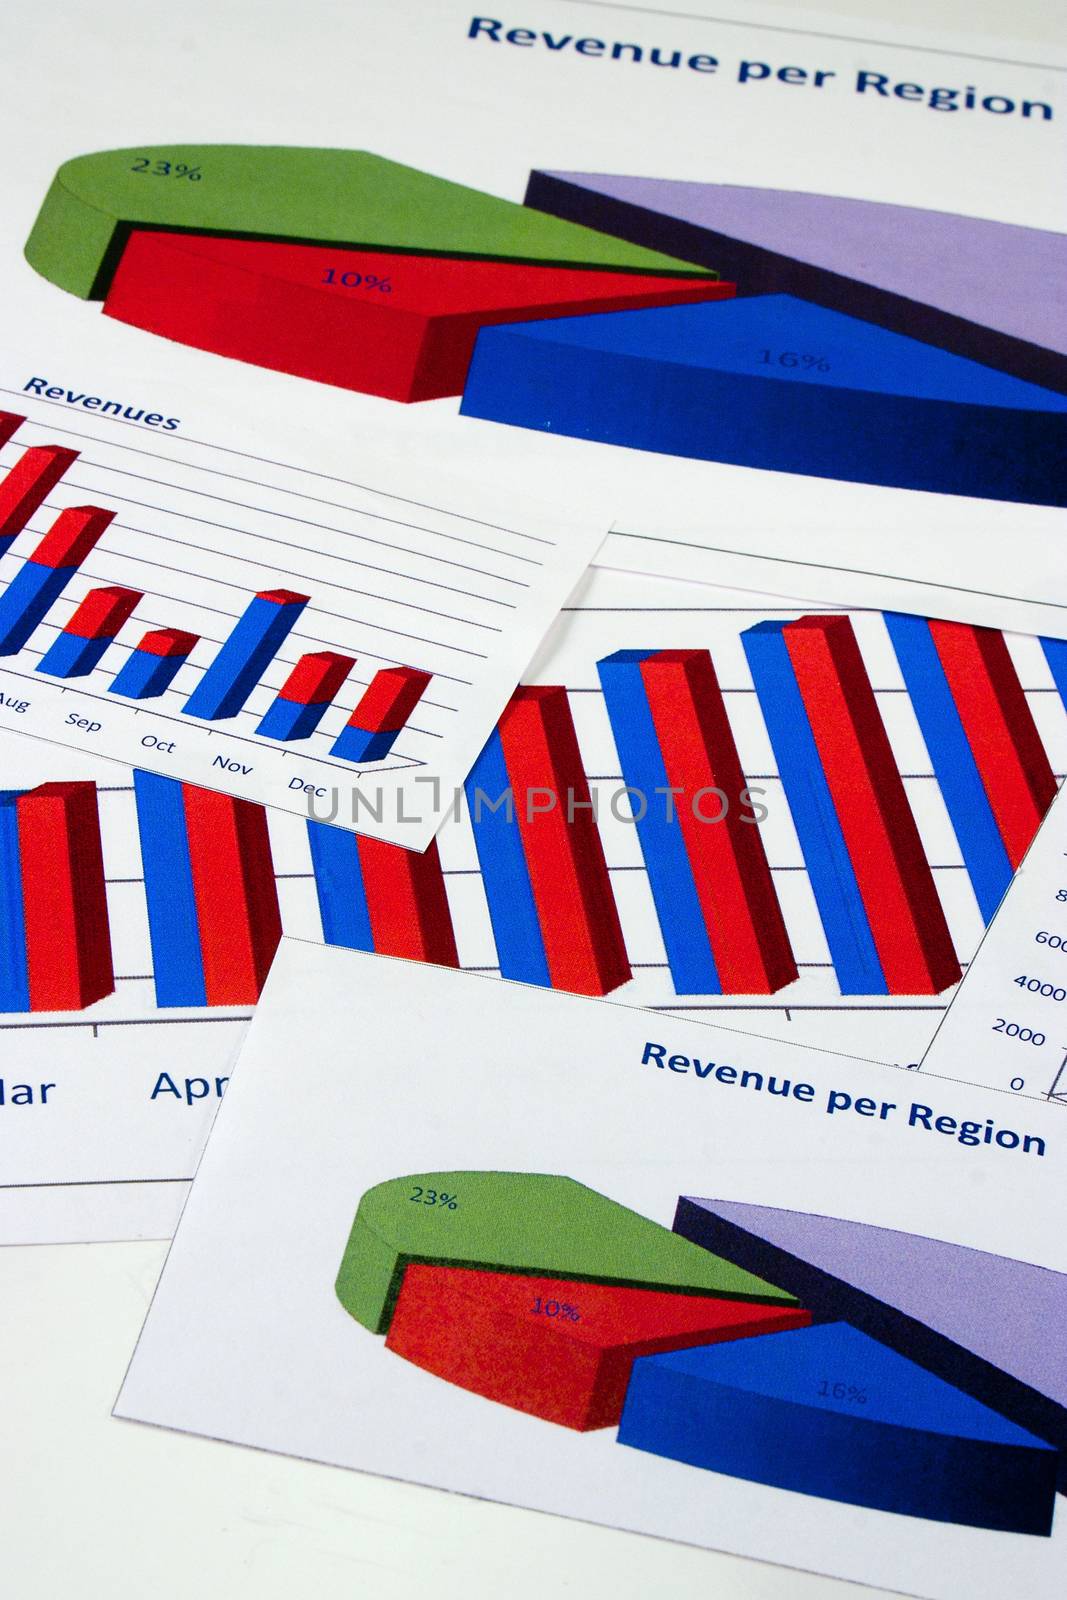 Financial management charts in vivid colors